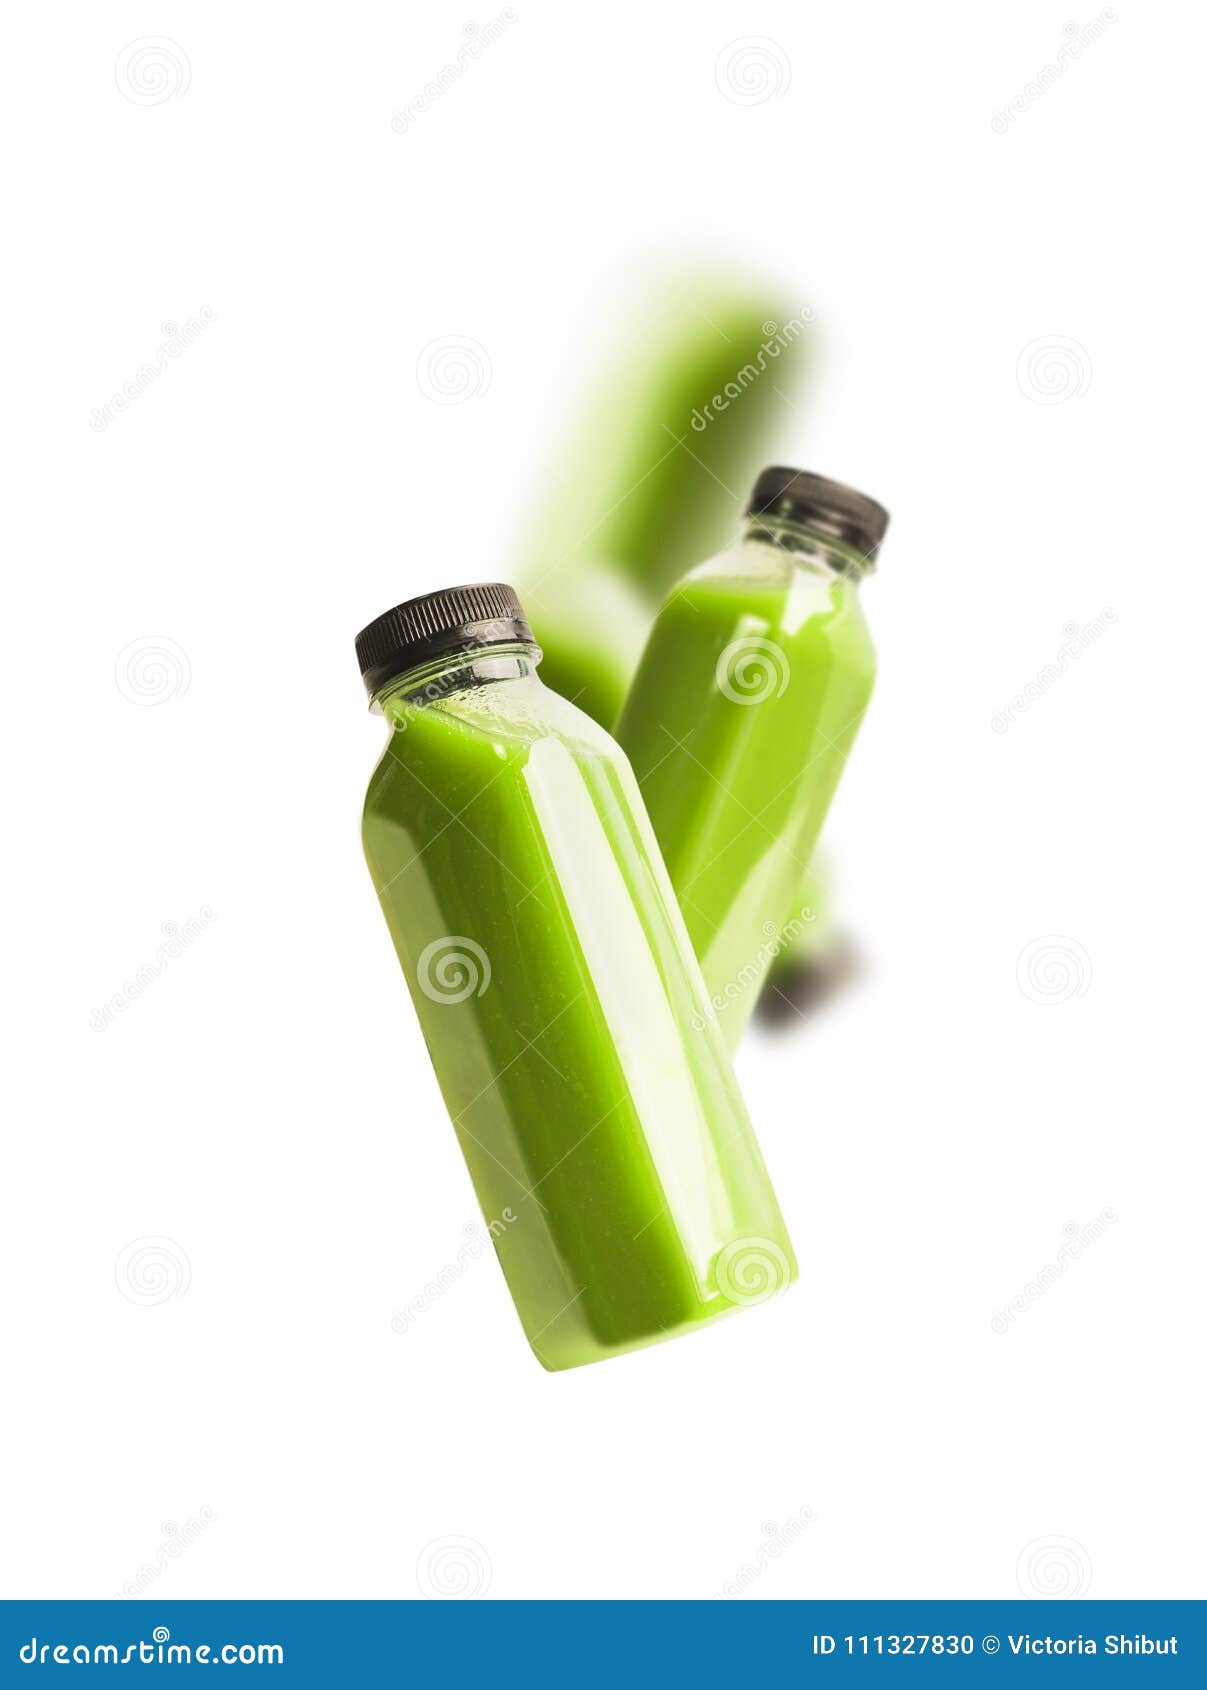 https://thumbs.dreamstime.com/z/flying-green-smoothie-juice-bottles-isolated-white-background-flying-green-smoothie-juice-bottles-isolated-white-111327830.jpg